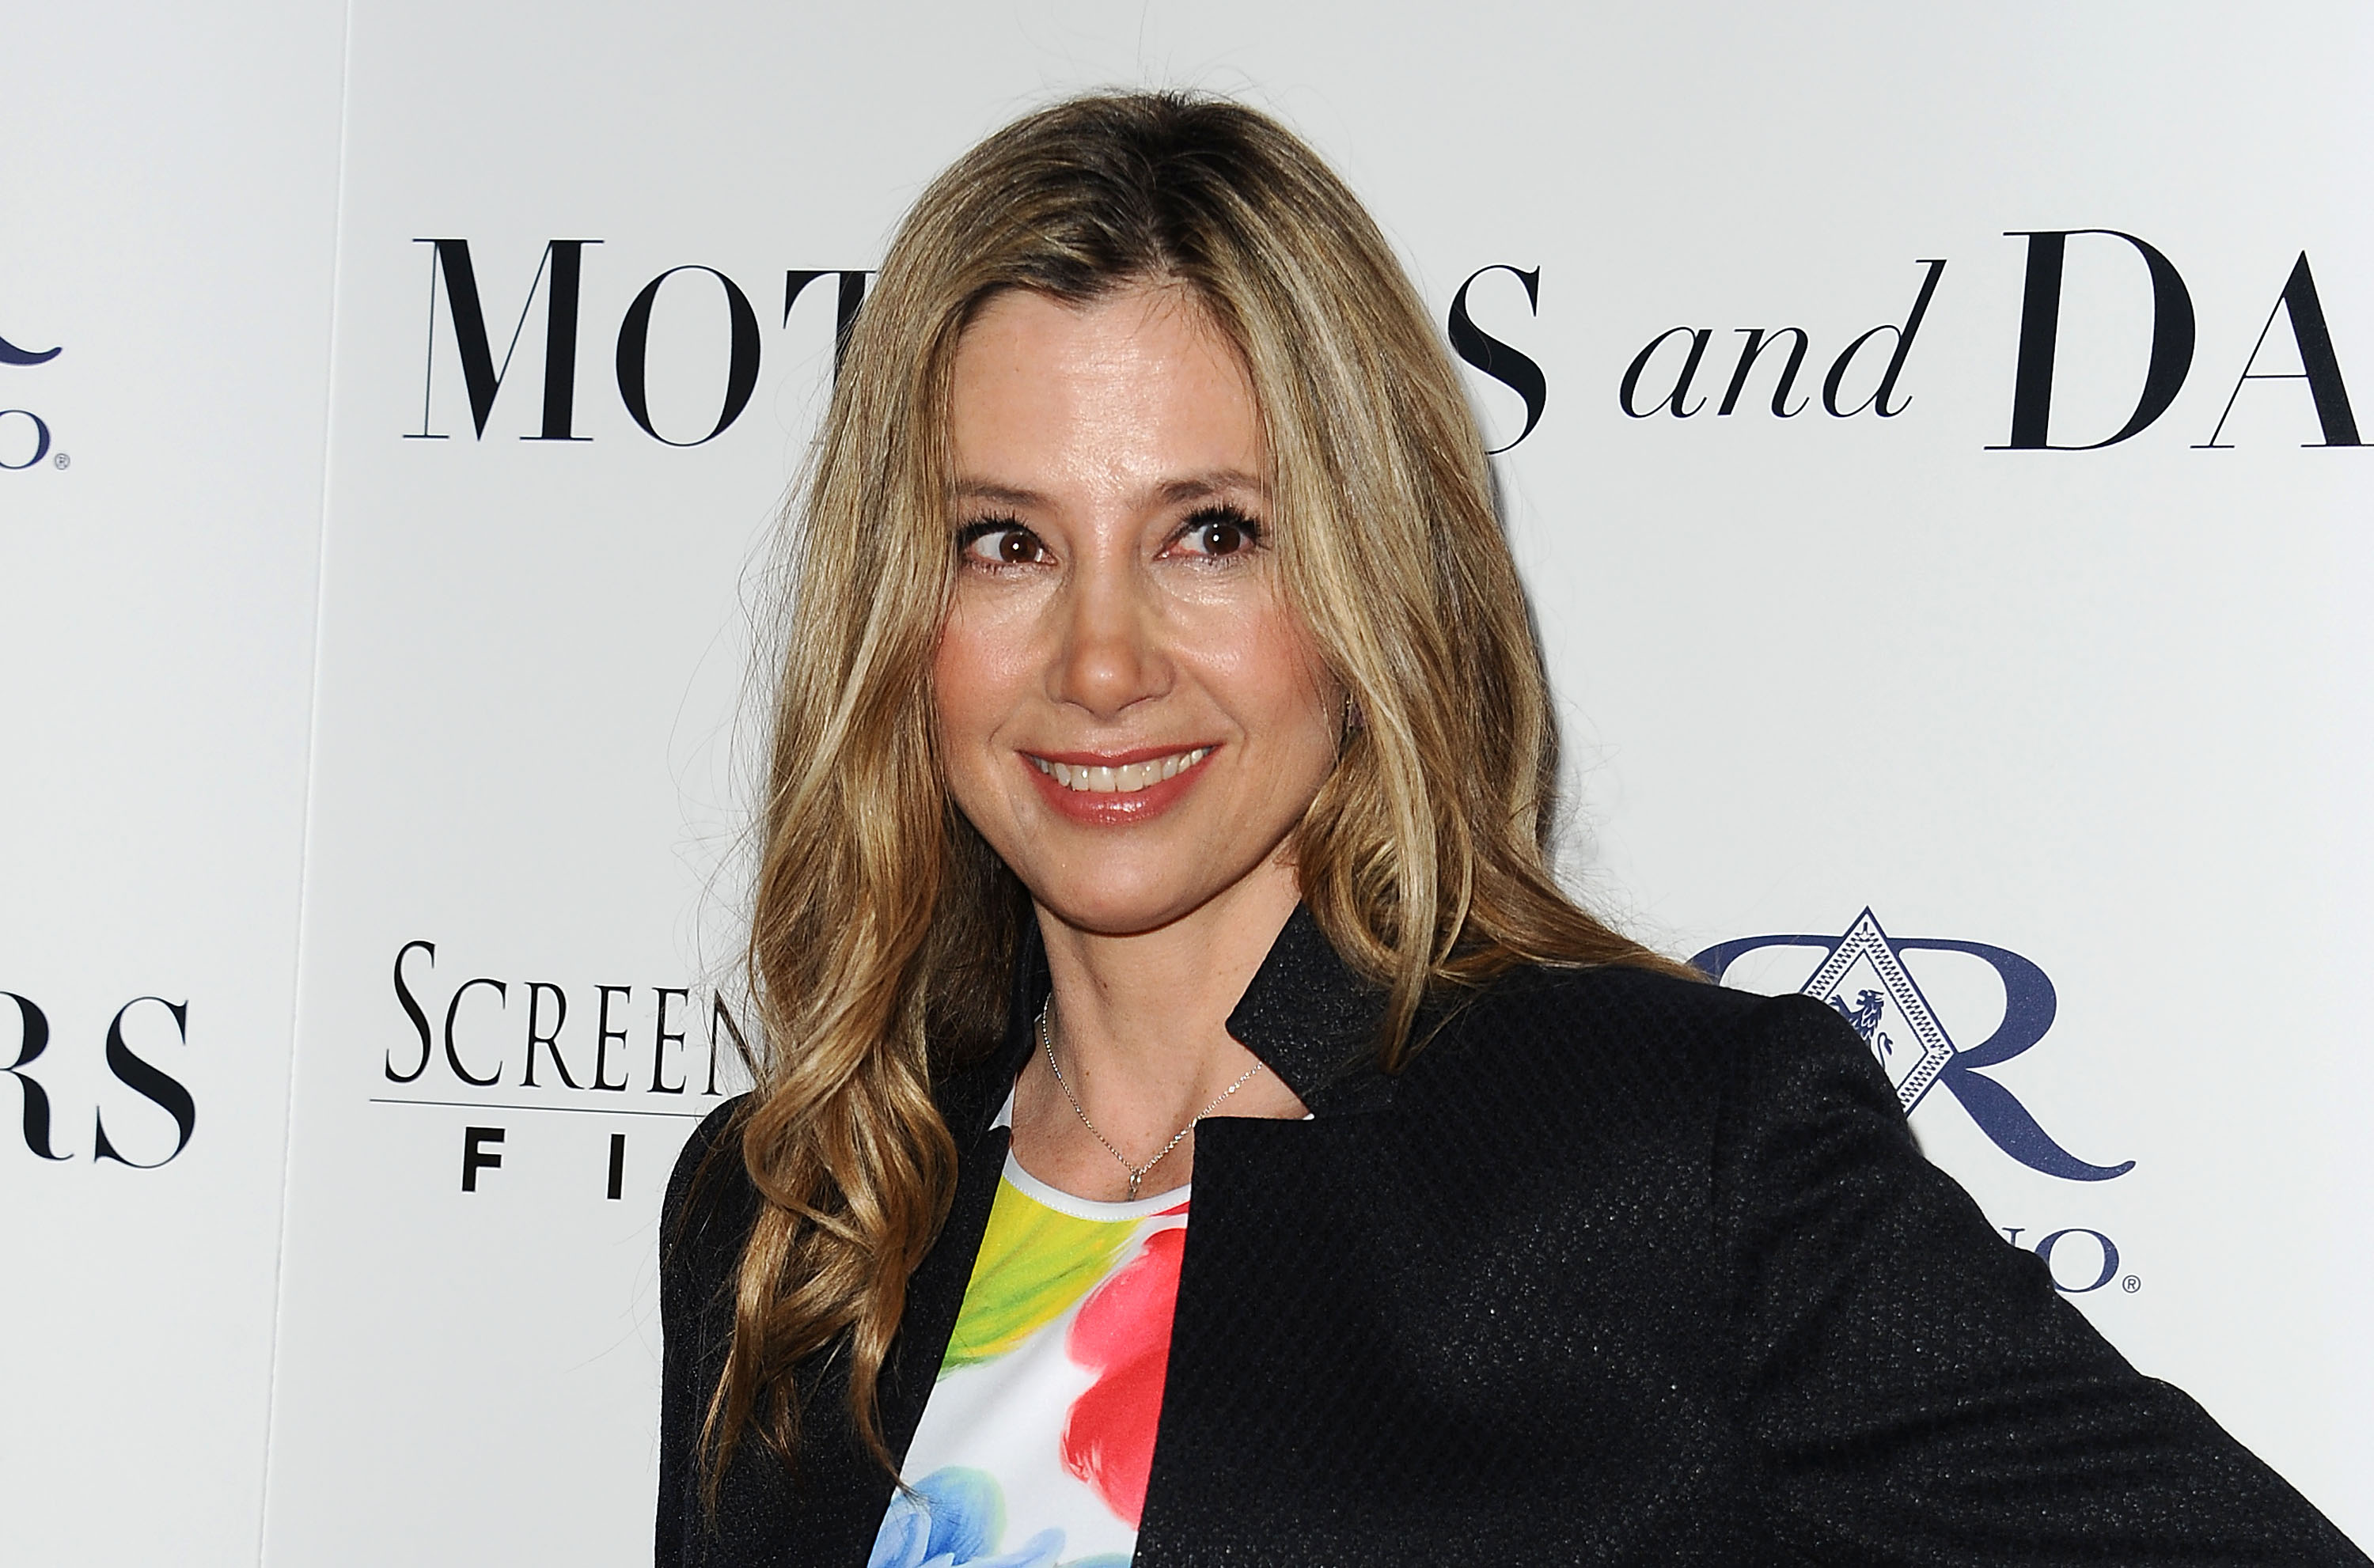 Actress Mira Sorvino attends the premiere of "Mothers and Daughters" at The London on April 28, 2016 in West Hollywood, California. (Jason LaVeris&mdash;FilmMagic)